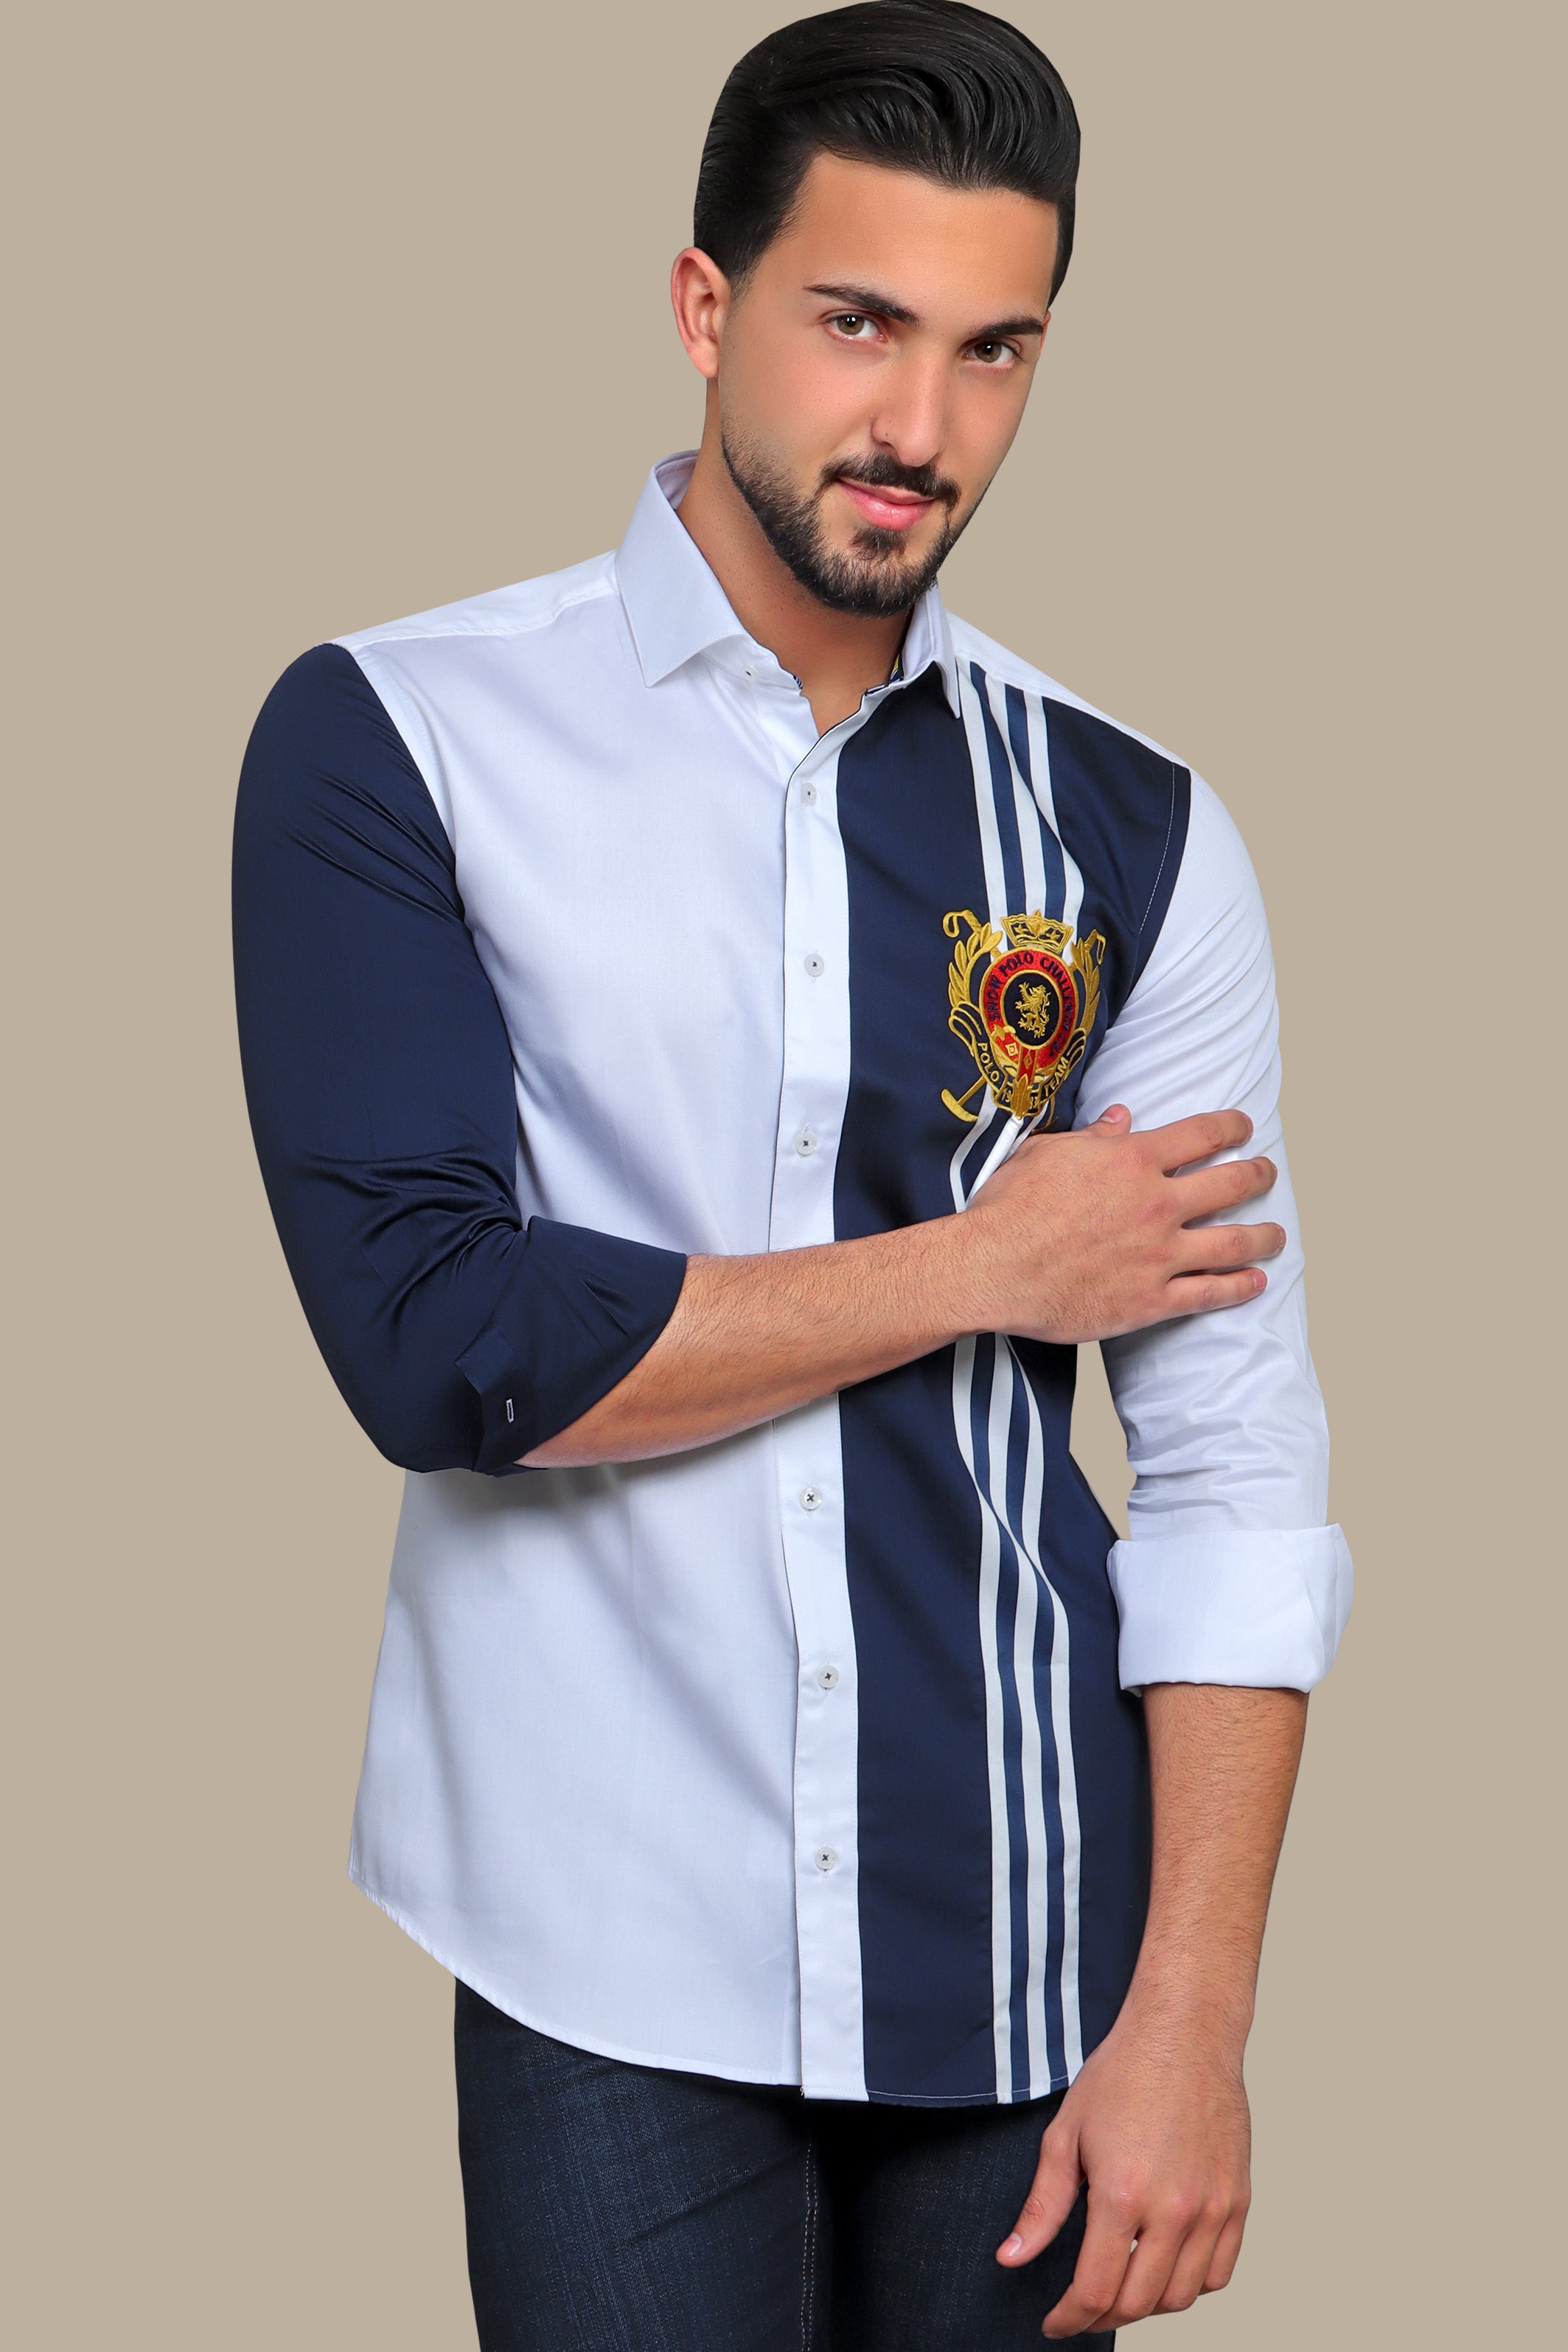 Regal Pride: White Shirt with Lion and Polo Badge Embellishments